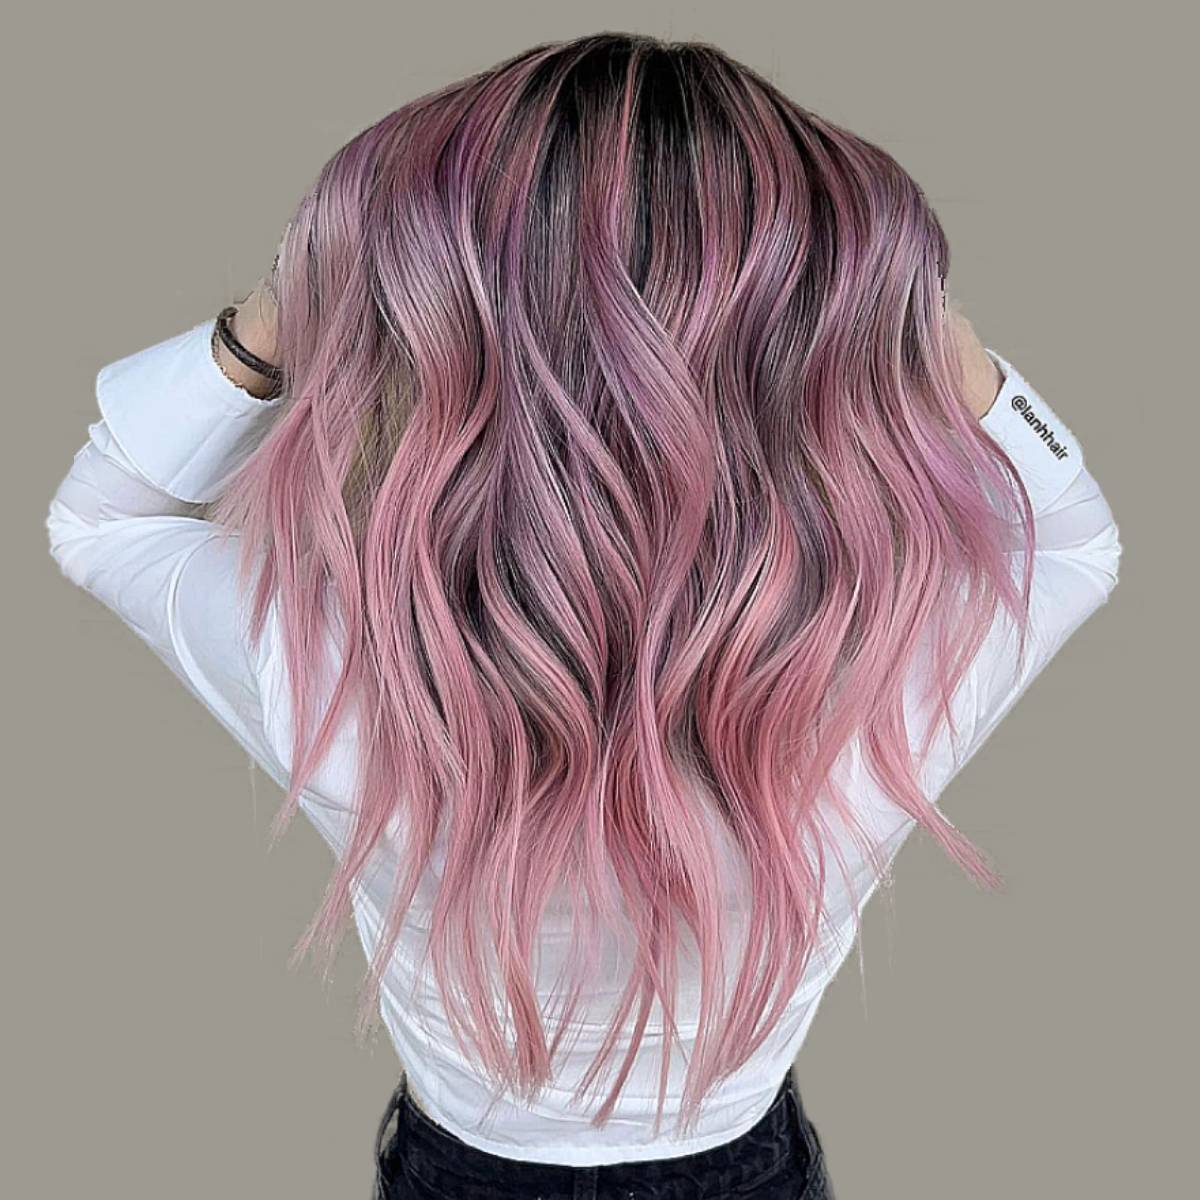 Pink Hair Colors - PRETTY PINK HAIR The next hair idea is so pretty! For  this look, the hair is dark pink at the root and then it changes into a  light